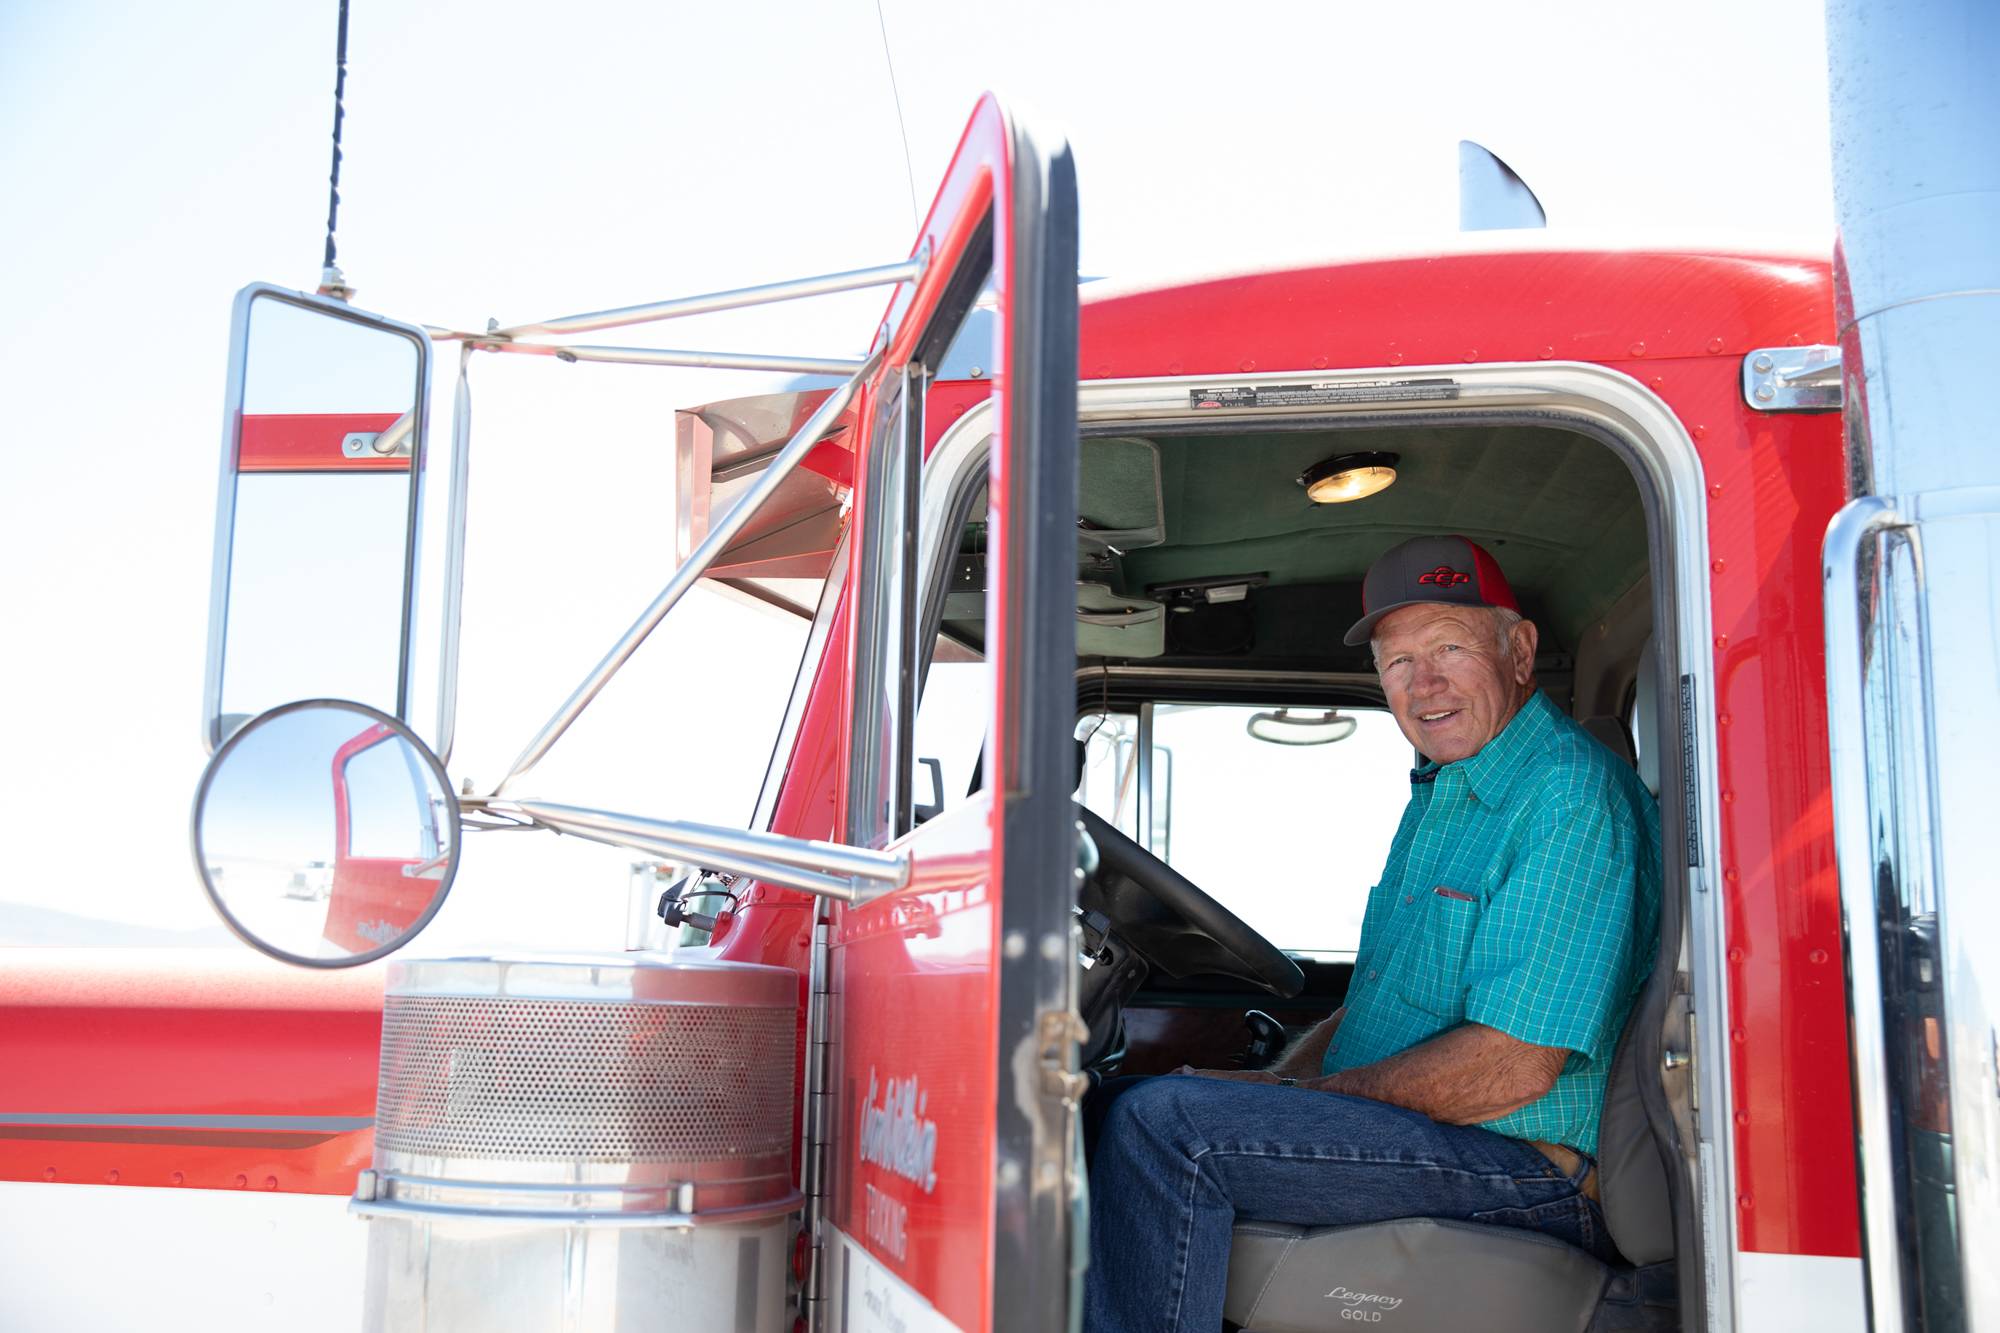 A portrait of Jim Wilkin, 78, owner of Jim Wilkin Trucking, in his favorite truck, a 2000 Peterbilt named “Big Red” in Panaca, Nevada, on Friday, June 10, 2022. “I wouldn’t trade this one for a brand-new one,” said Jim.